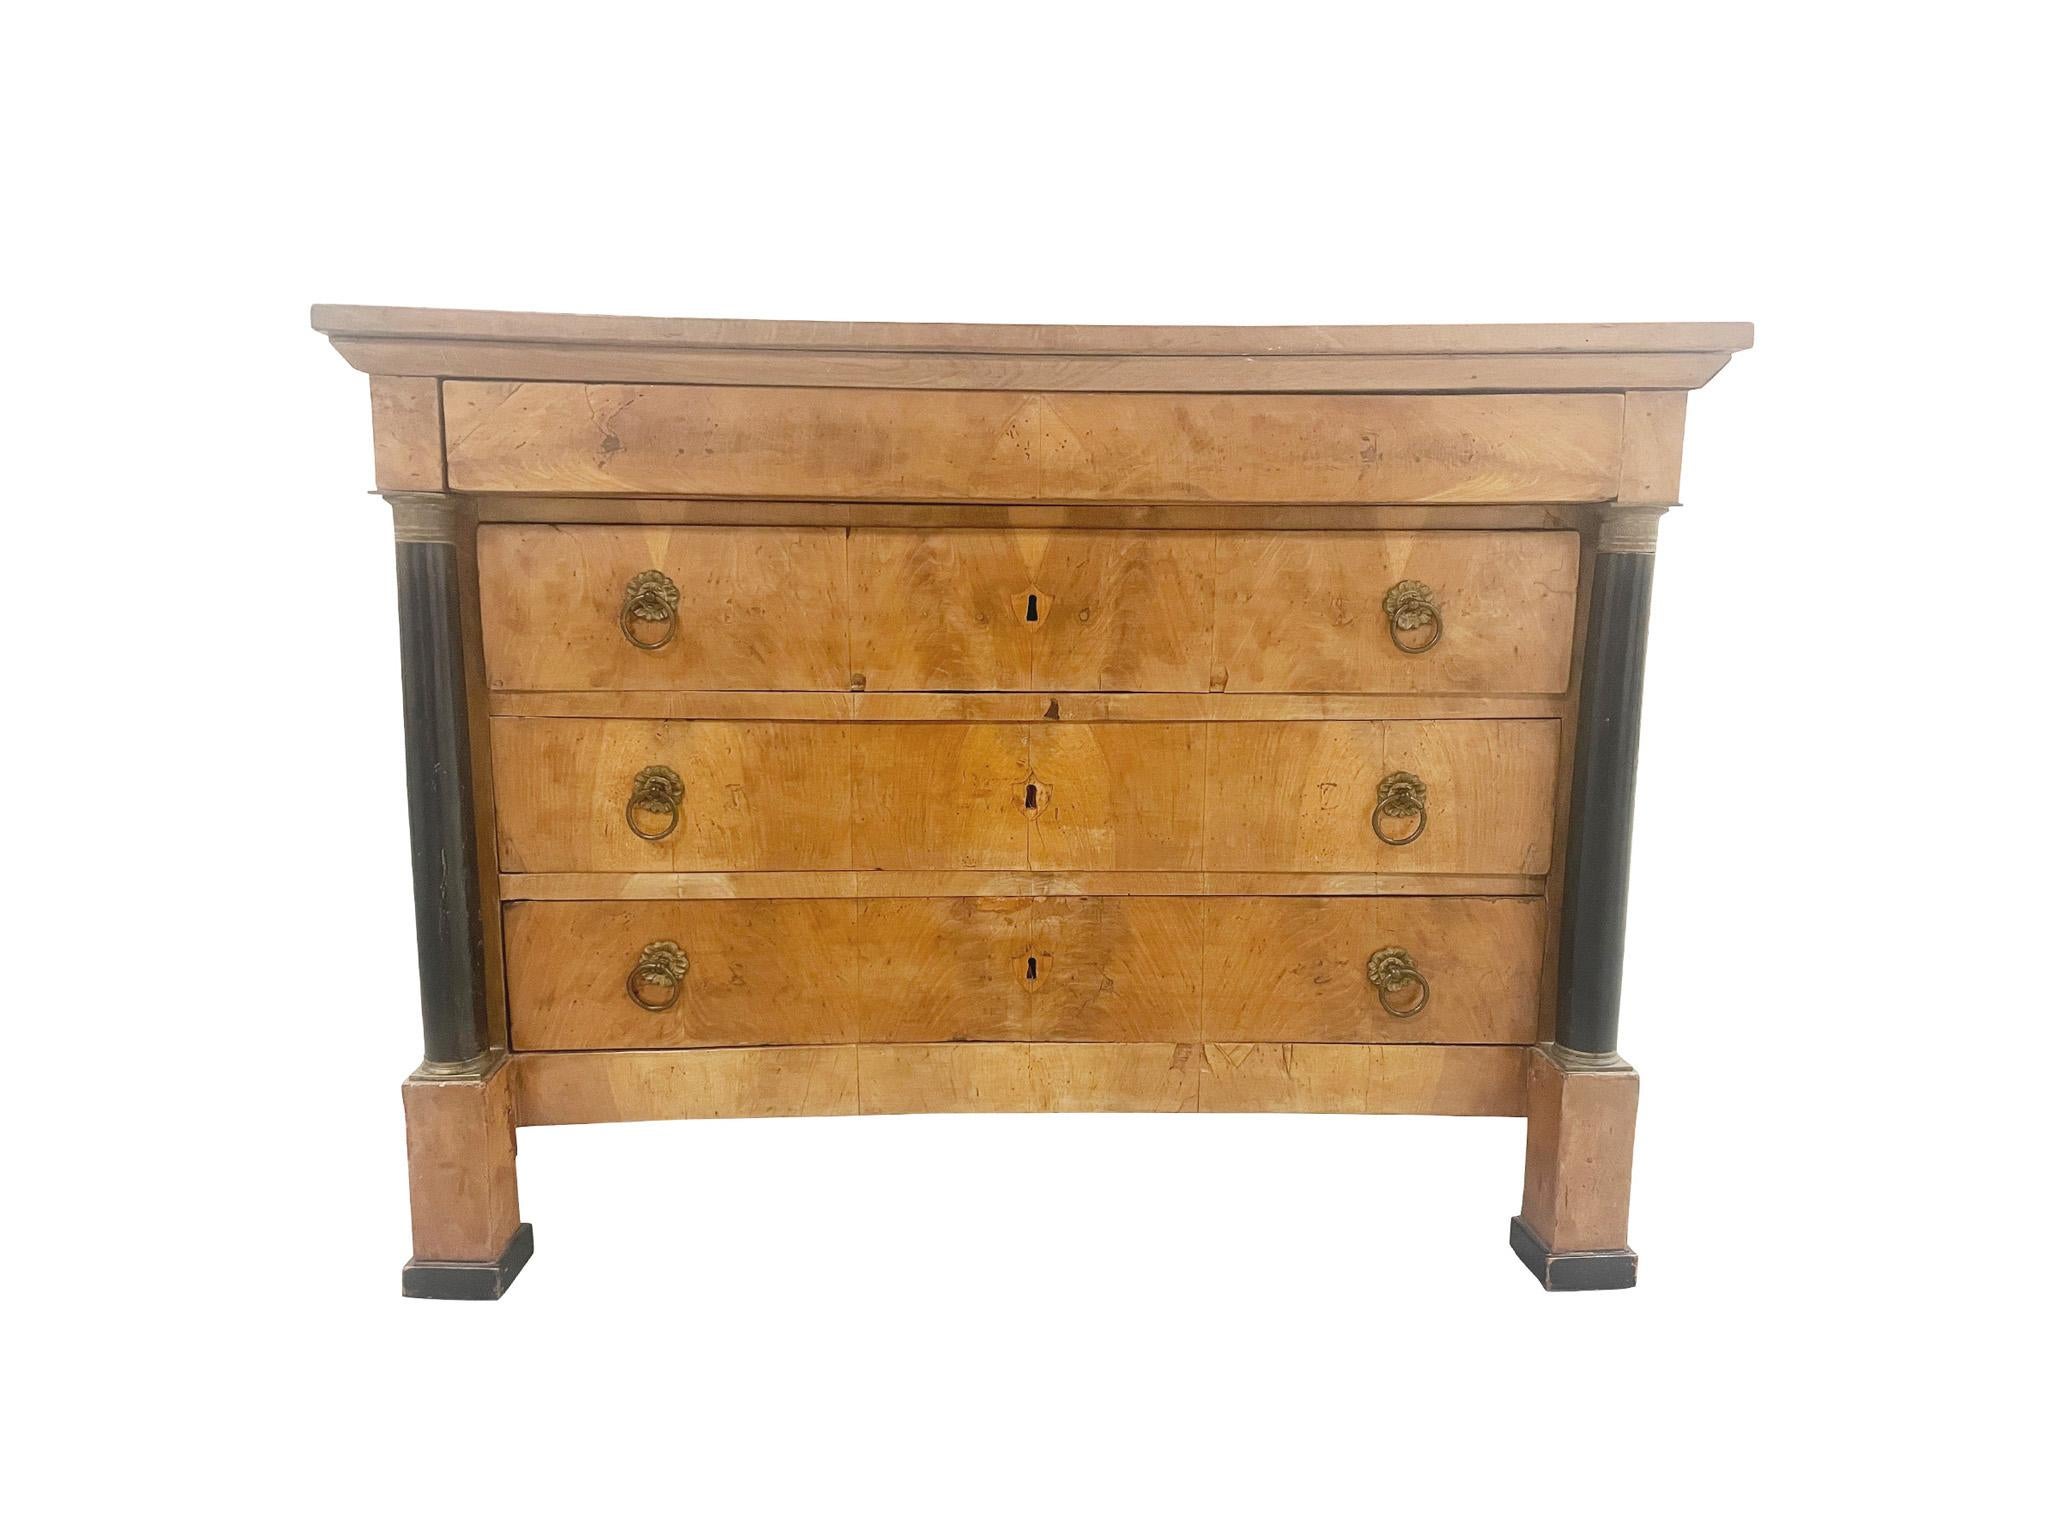 Hand-crafted in the 19th Century, this Biedermeier chest of drawers is constructed with one narrow compartment atop 3 larger drawers. Decorative features characteristic of the Biedermeier style include black front columns and ormolu pulls and foot